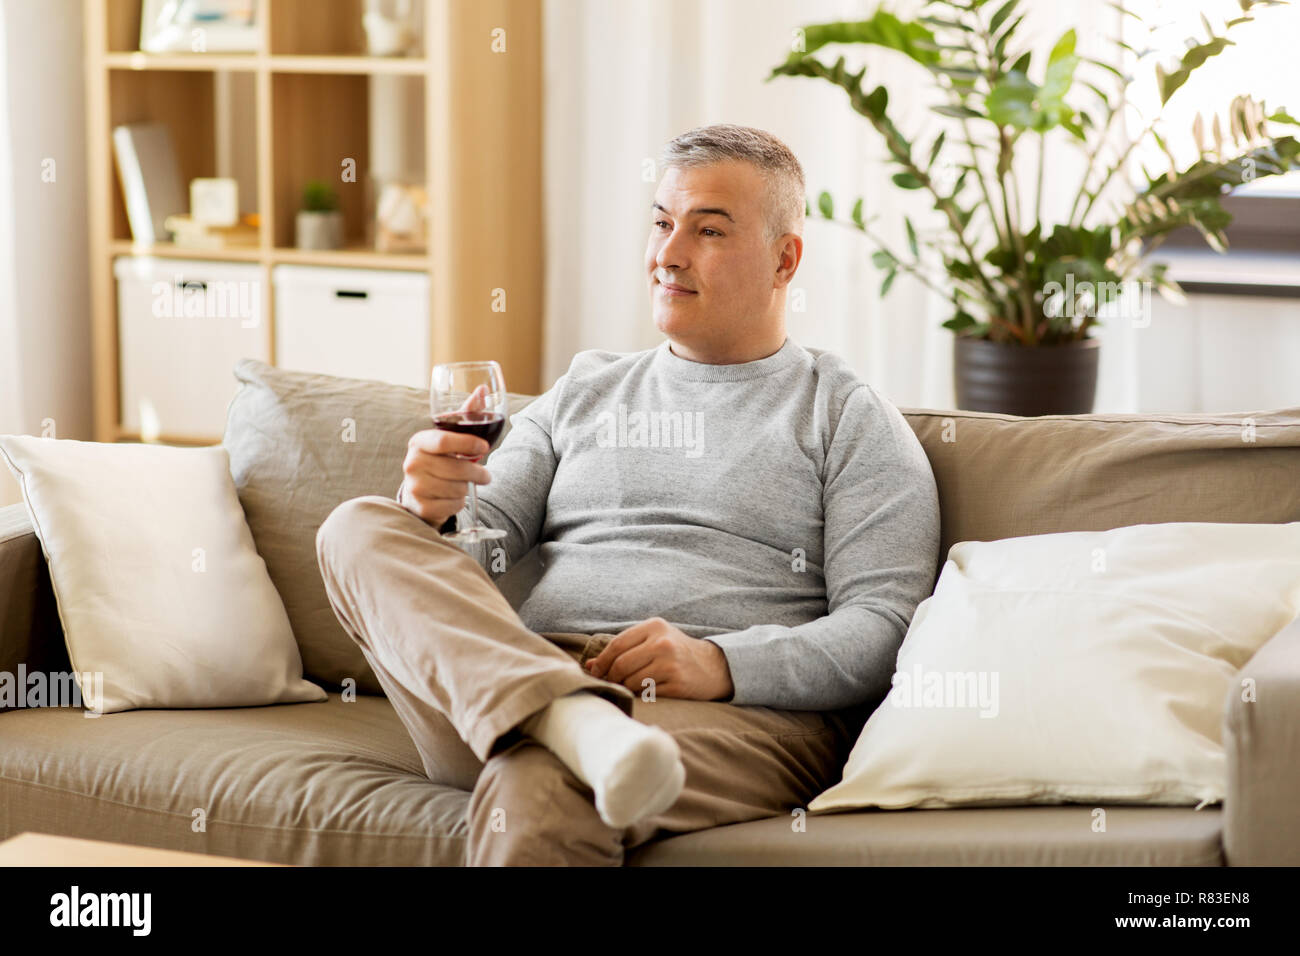 man drinking red wine from glass at home Stock Photo